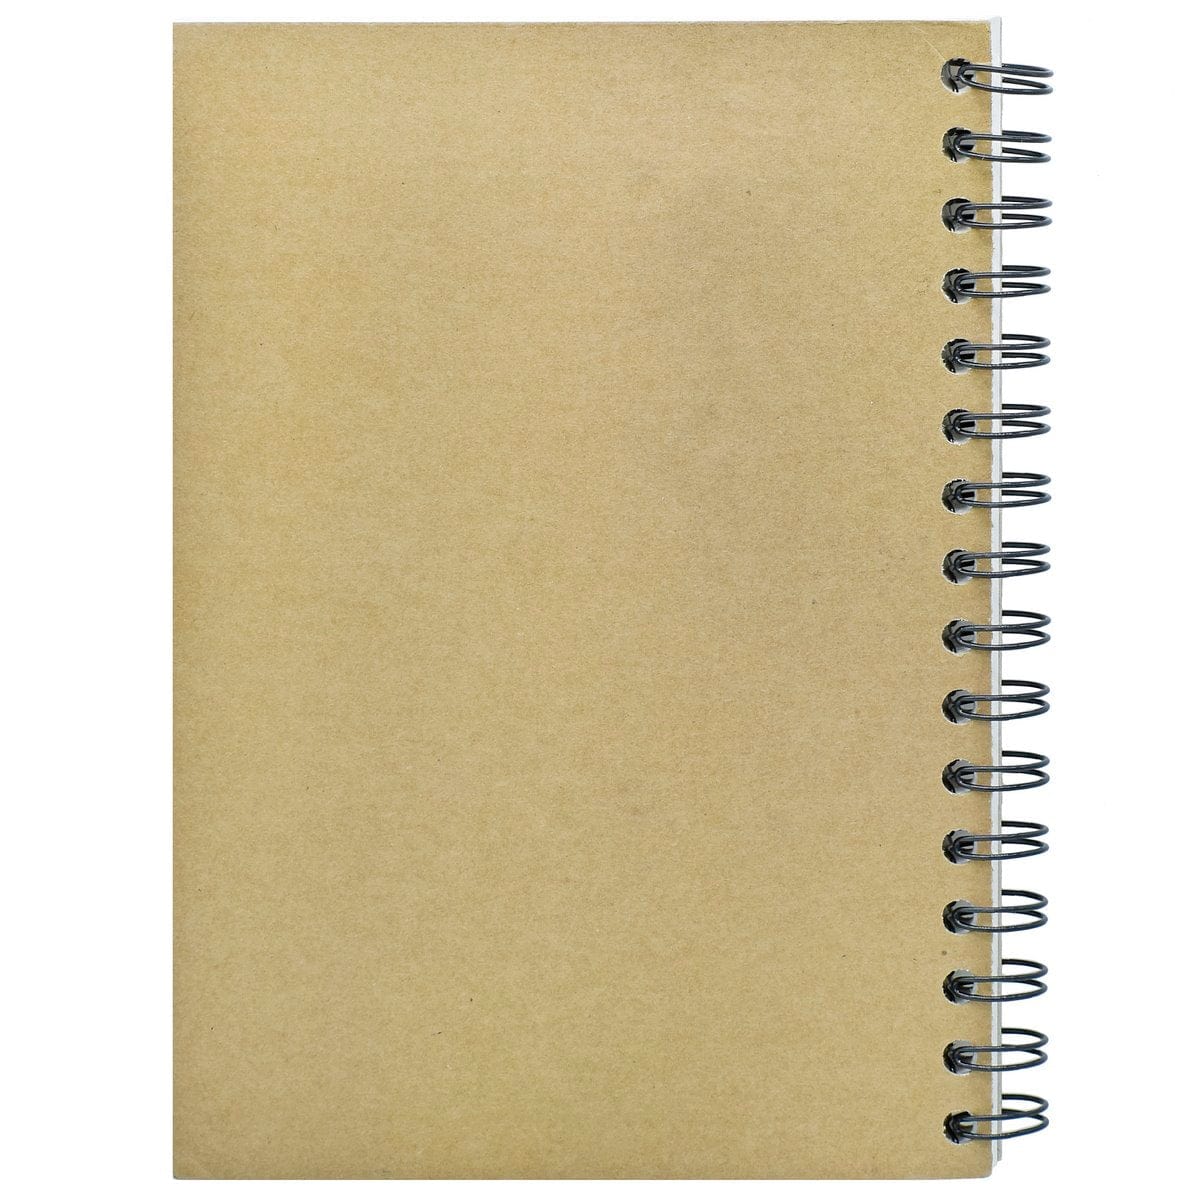 jags-mumbai Notebooks & Diaries Jags Unruled Notebook Wiro 192Sheet 96Pages 80Gsm A5 JCCPA5